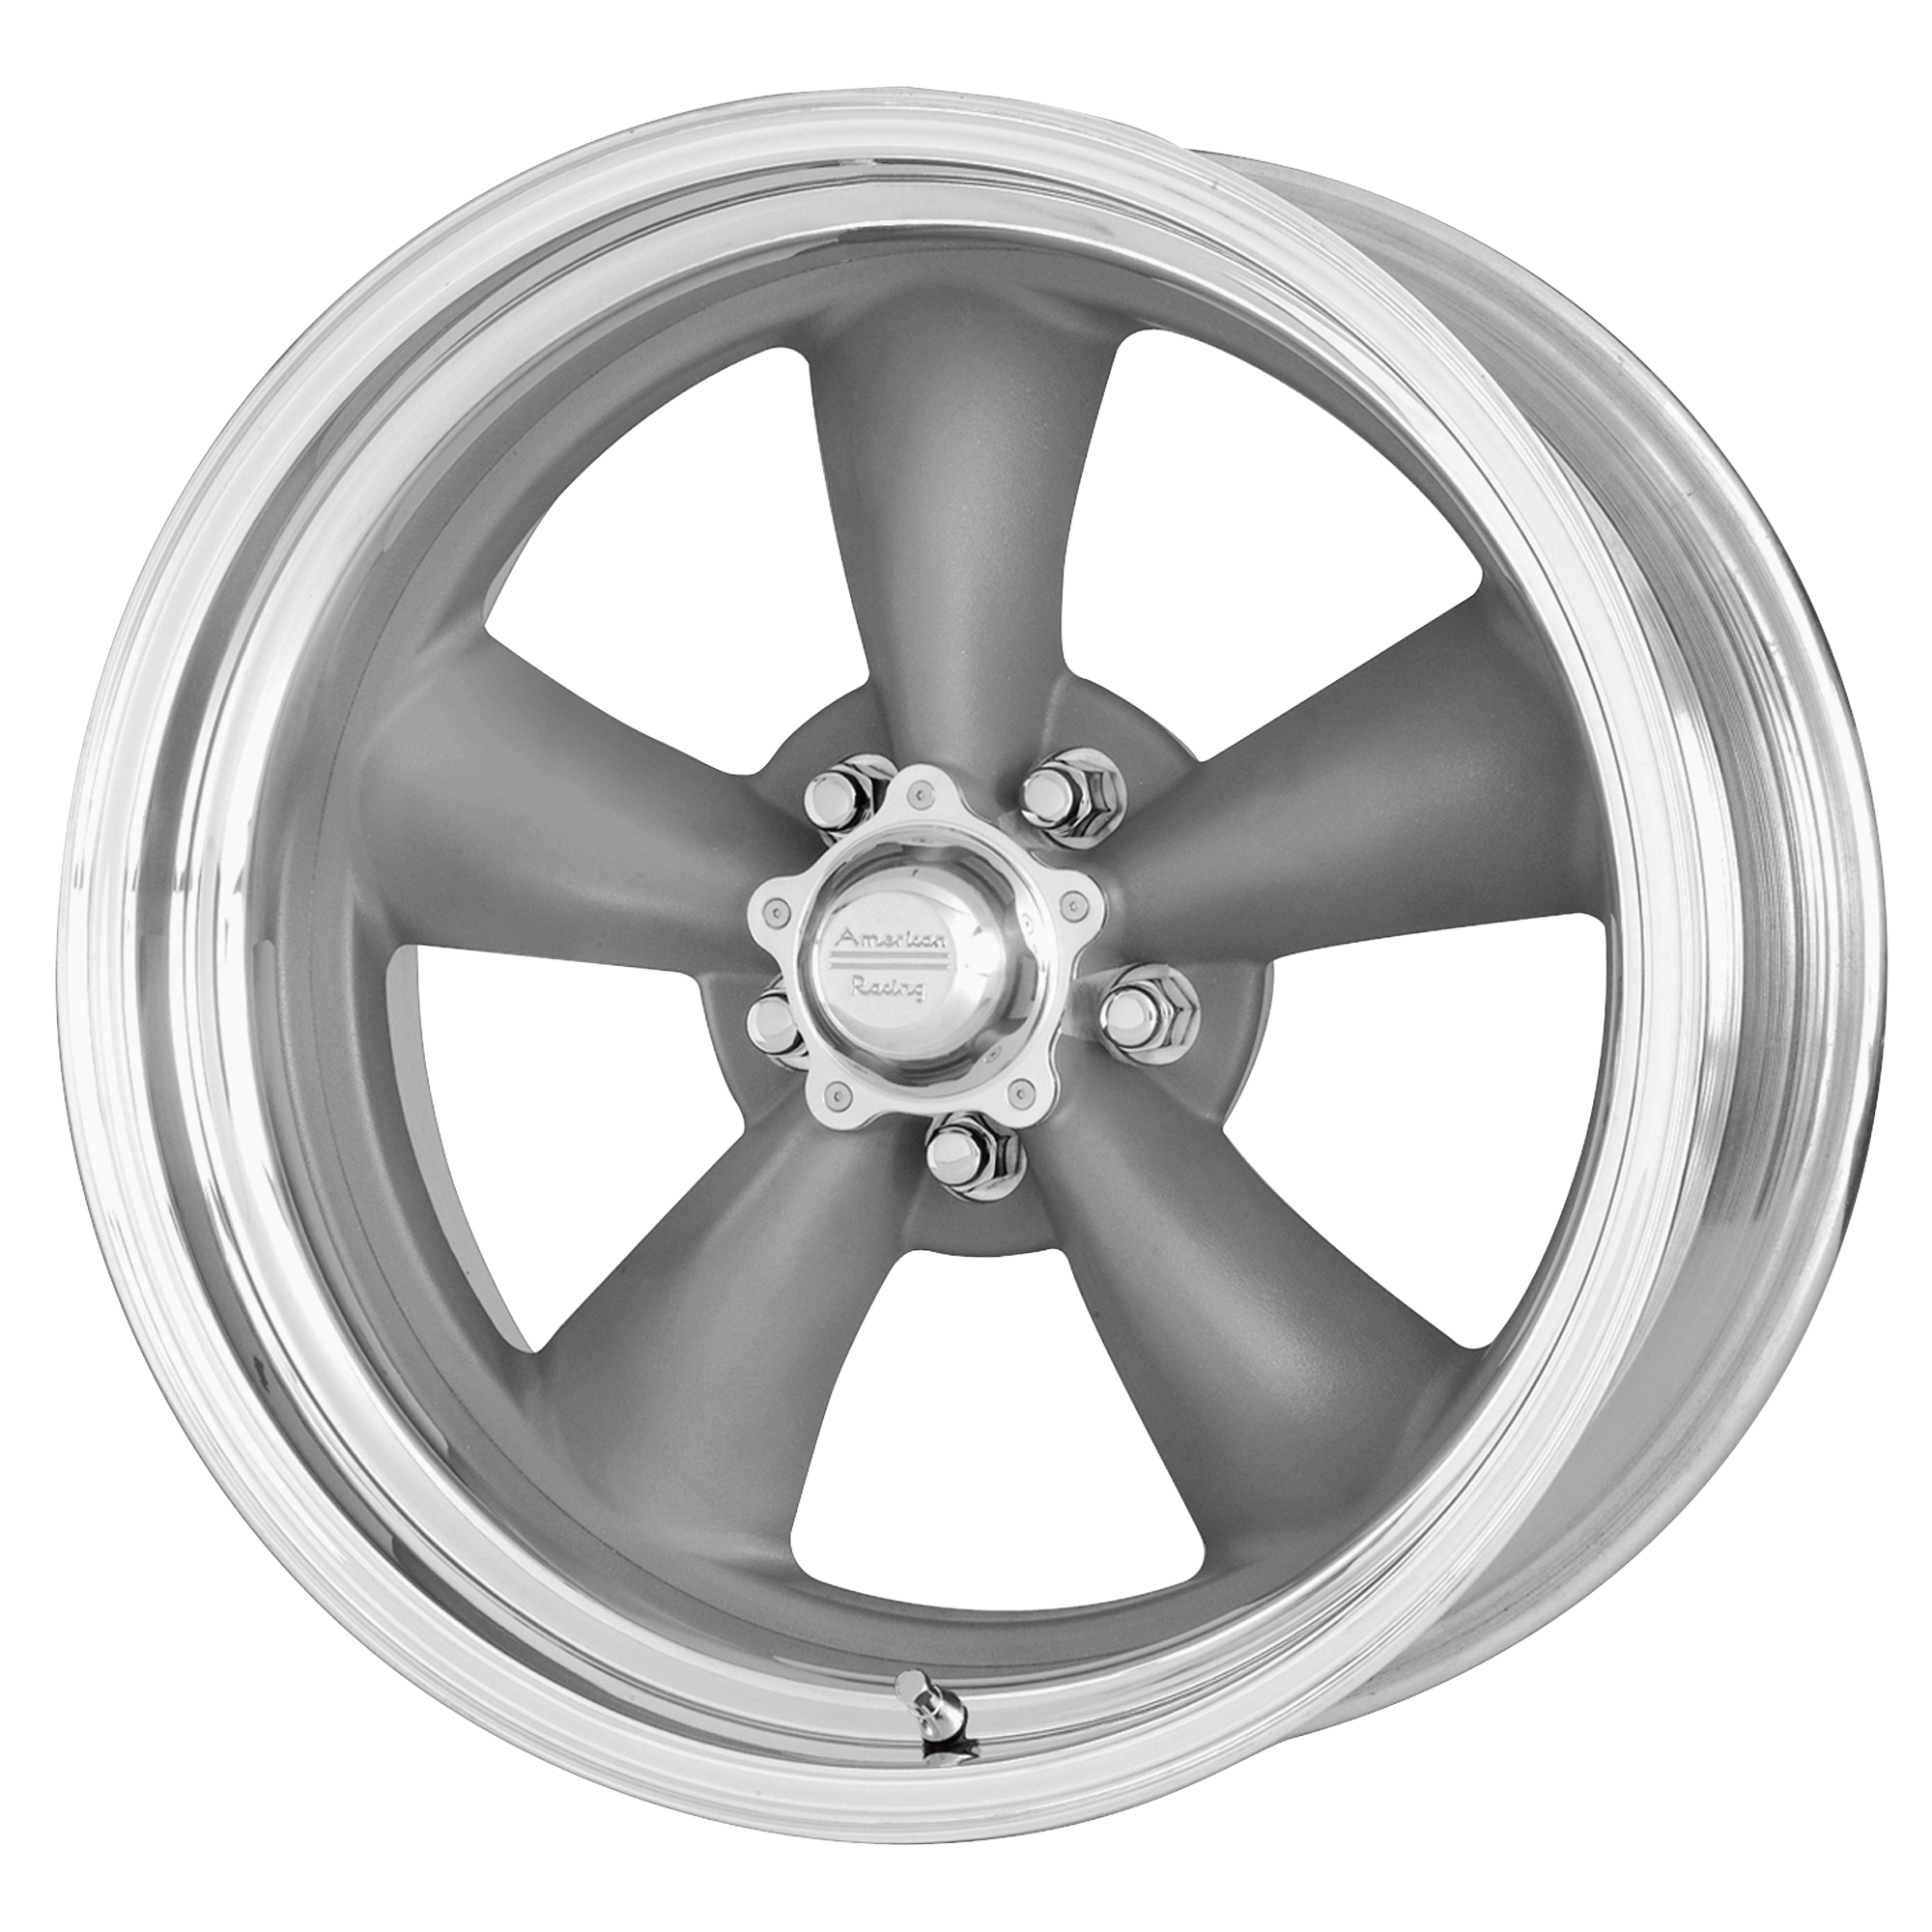 CLASSIC TORQ THRUST II ONE PIECE 15x7 5x114.30 MAG GRAY W/ MACHINED LIP (-6 mm) - Tires and Engine Performance